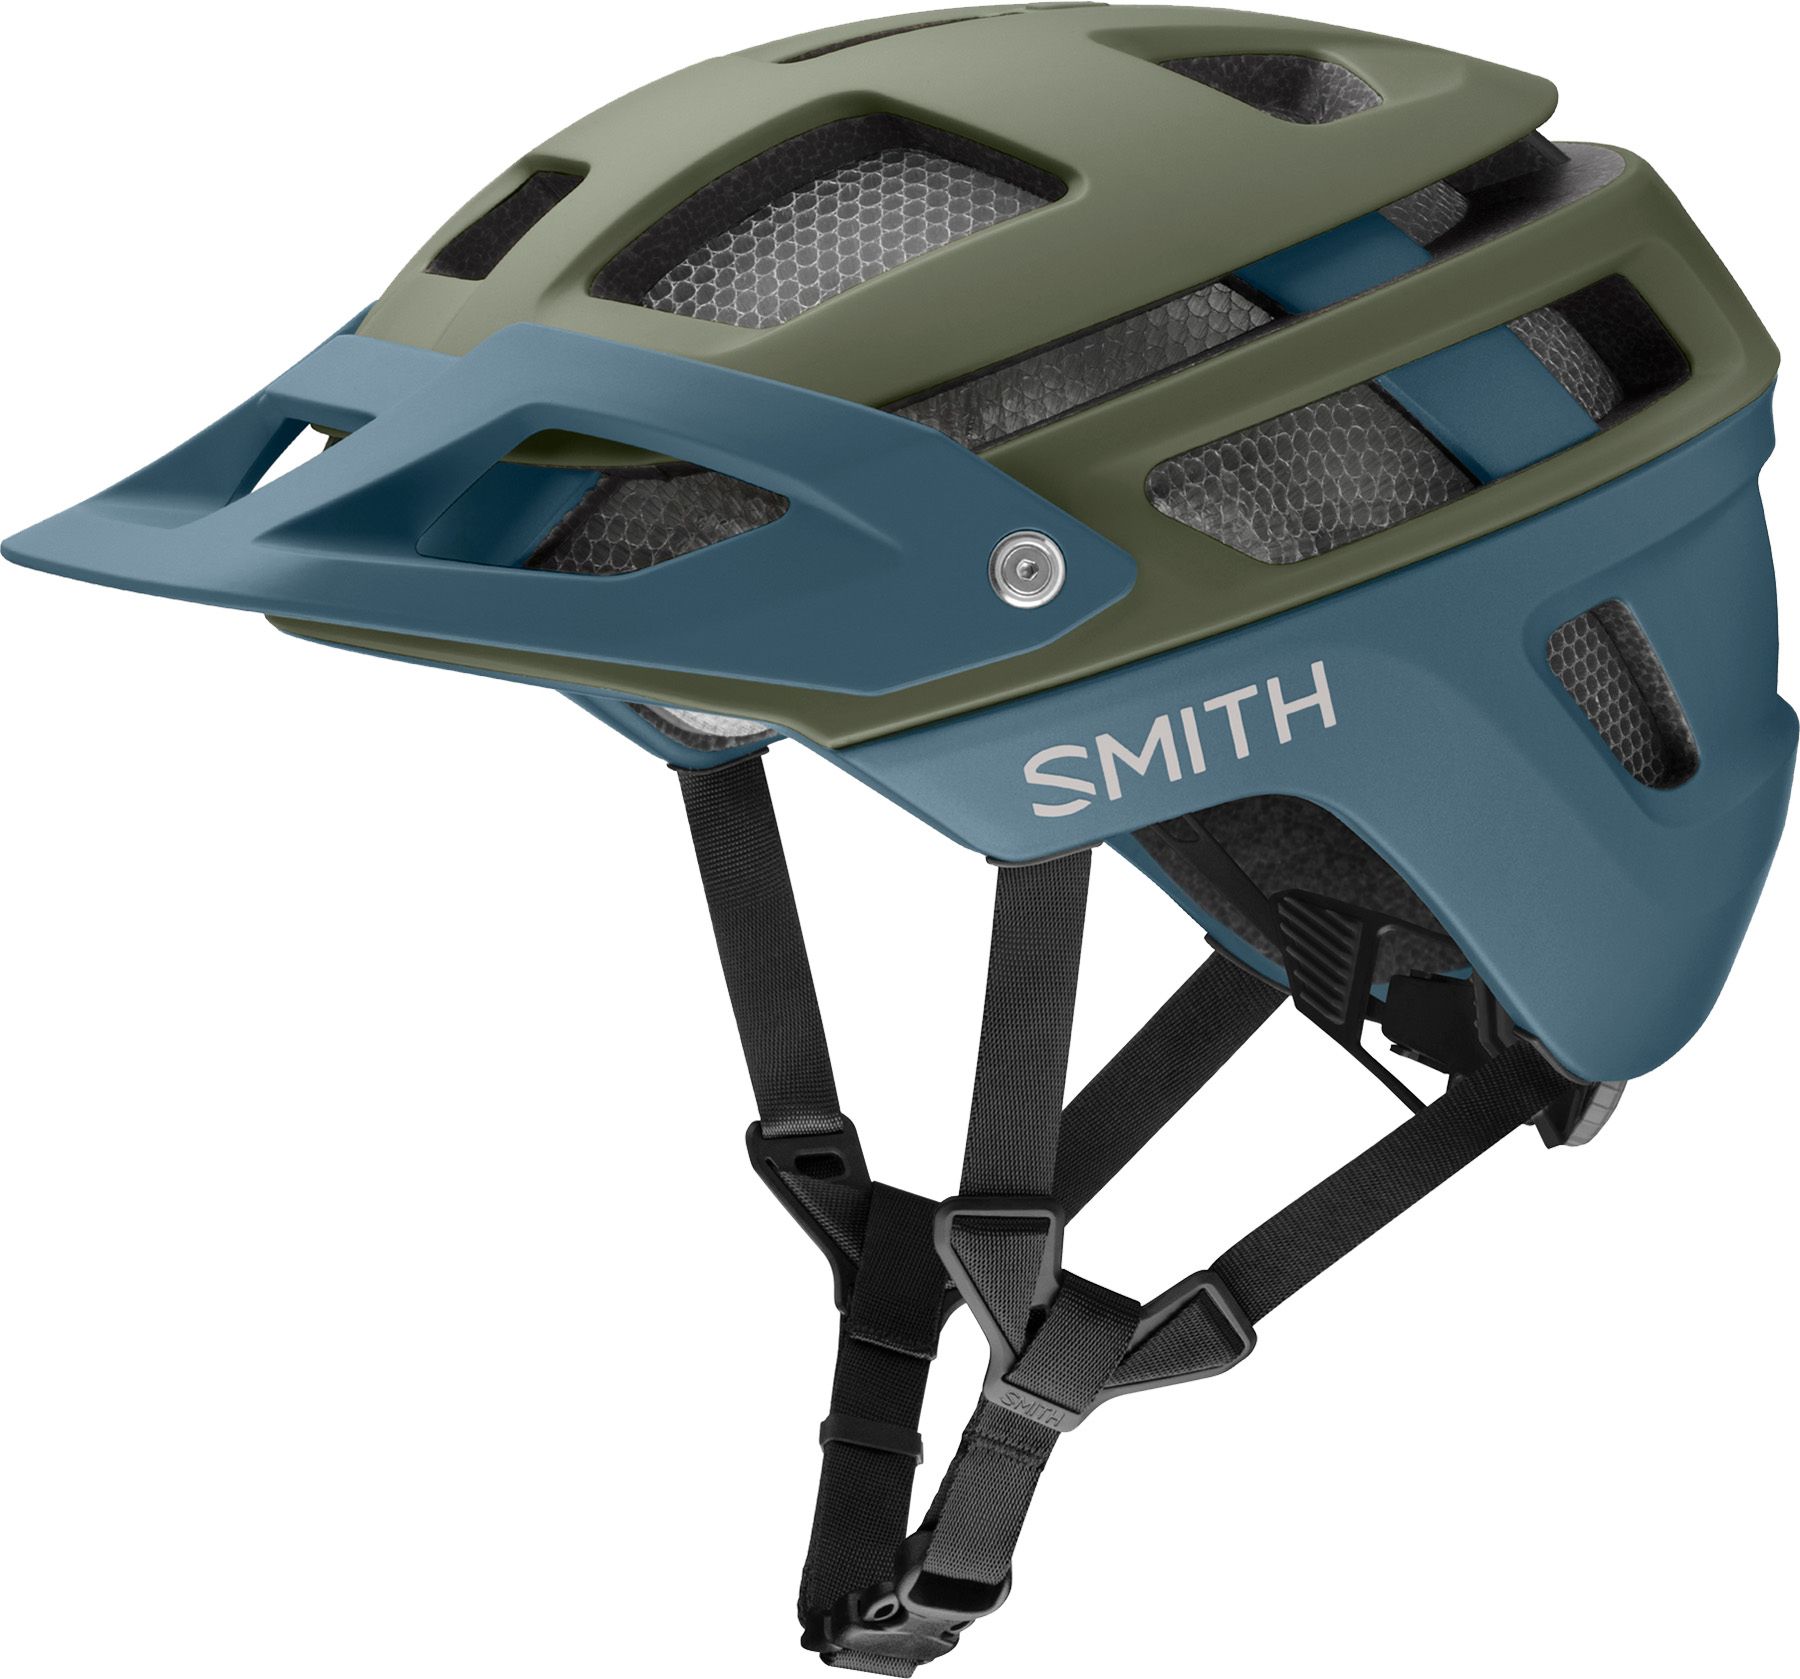 Photos - Bike Helmet Smith Adult Forefront 2 MIPS Mountain , Large, Matte Moss/Stone 